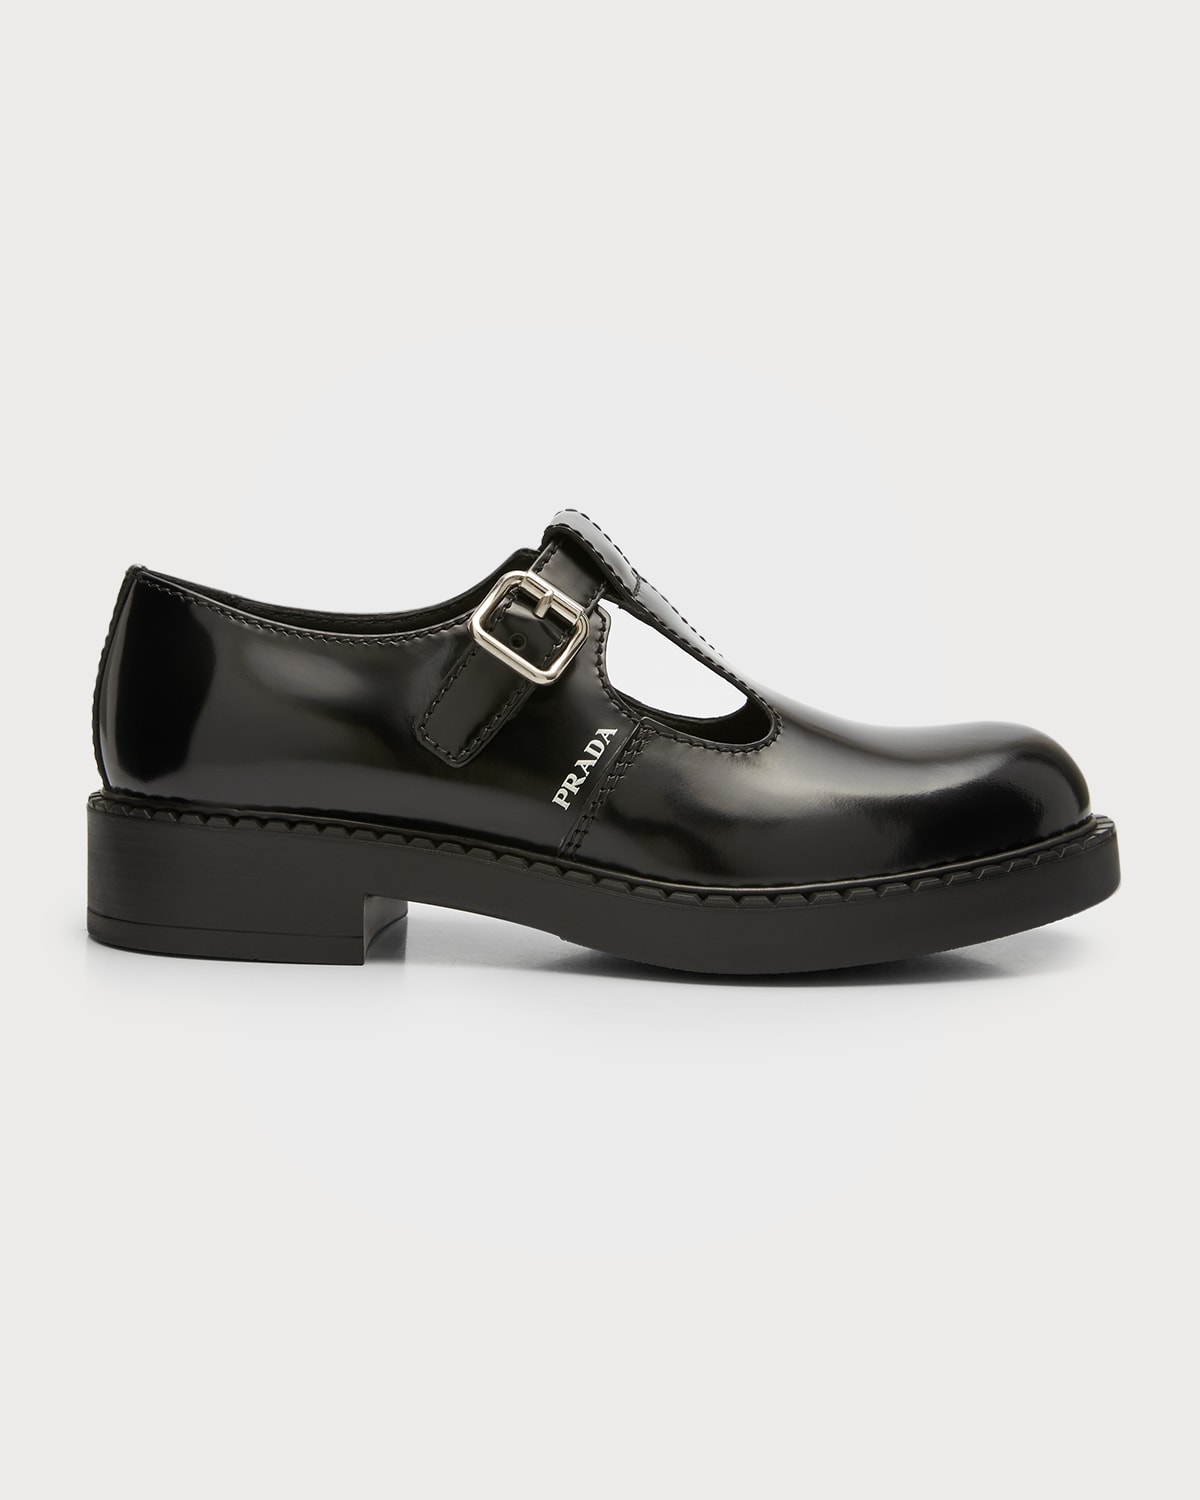 Men's T-Strap Brushed Leather Mary Jane Shoes